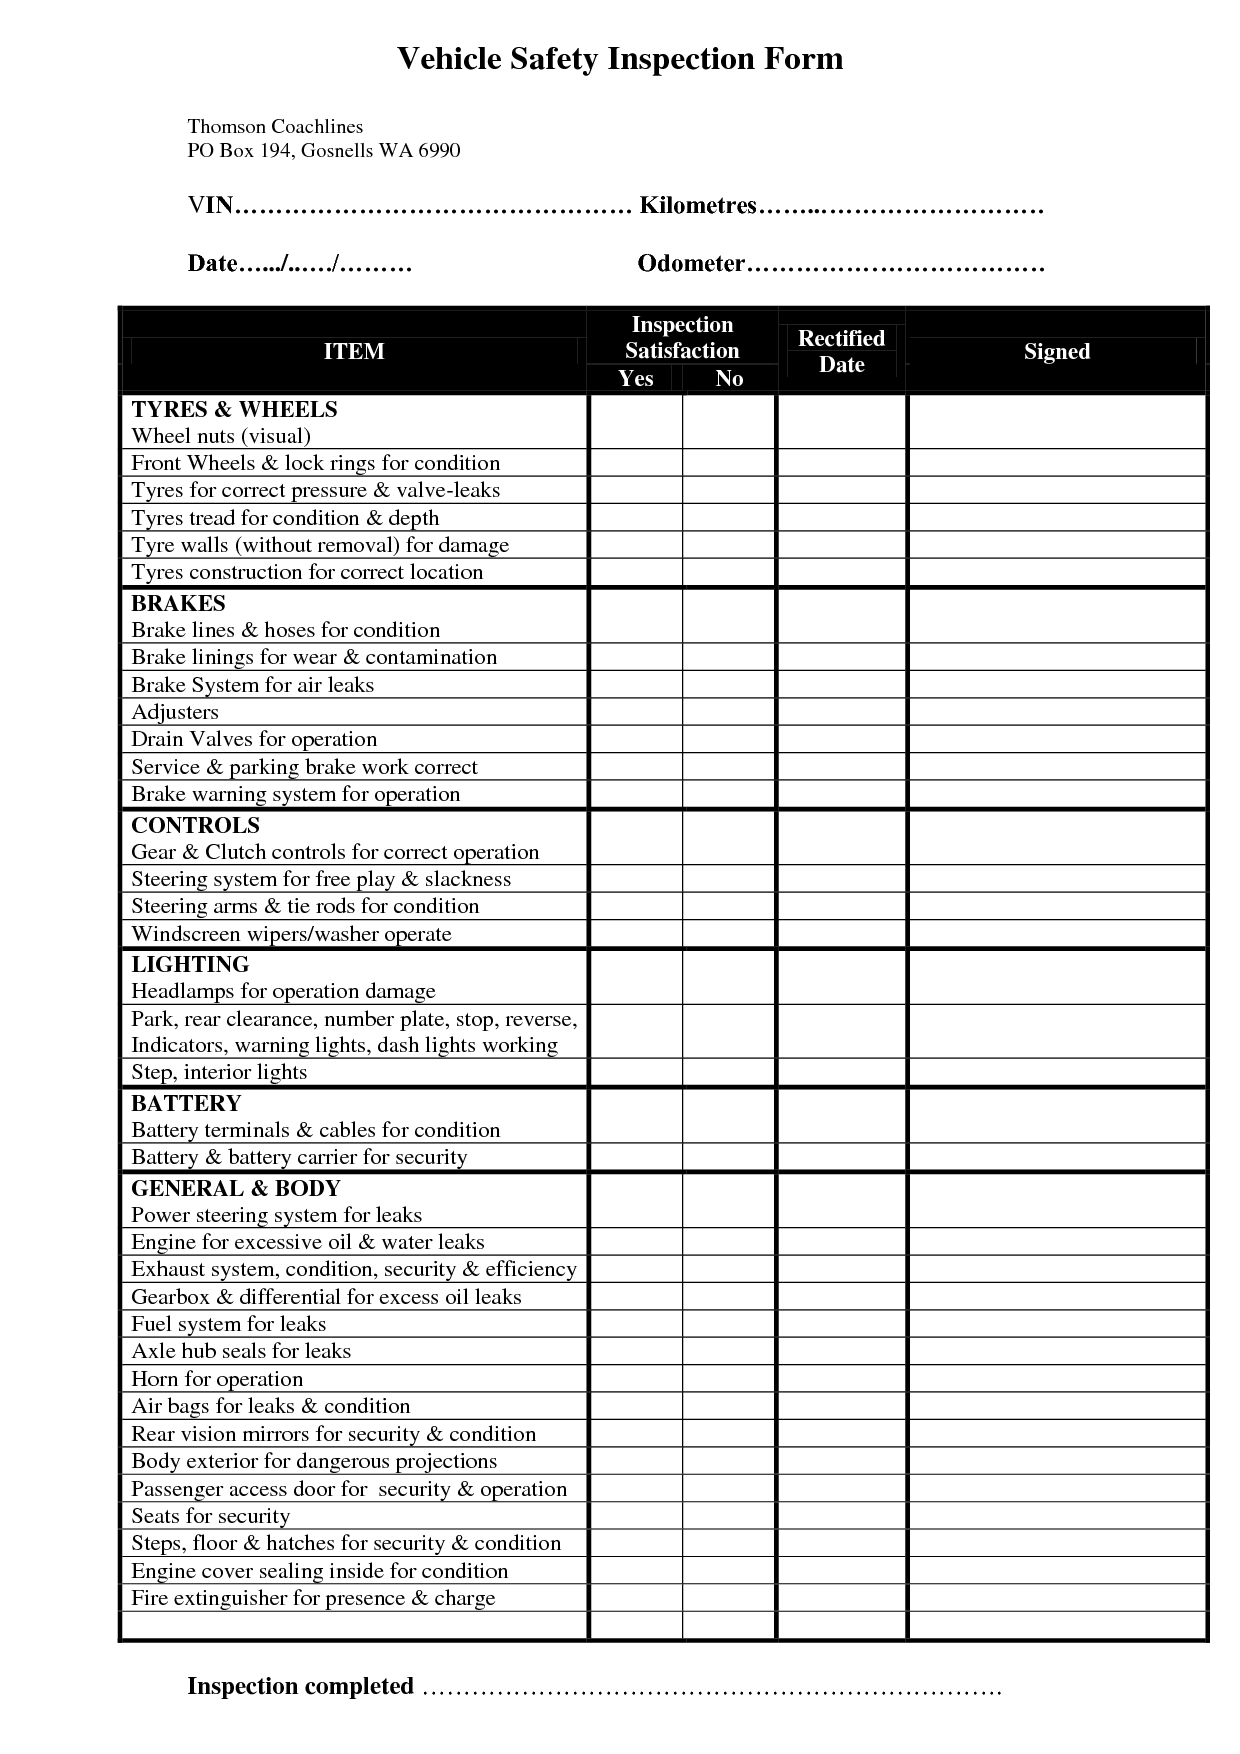 Safety Inspection Checklist Template - HSE Images & Videos Gallery Intended For Vehicle Safety Inspection Checklist Template Inside Vehicle Safety Inspection Checklist Template